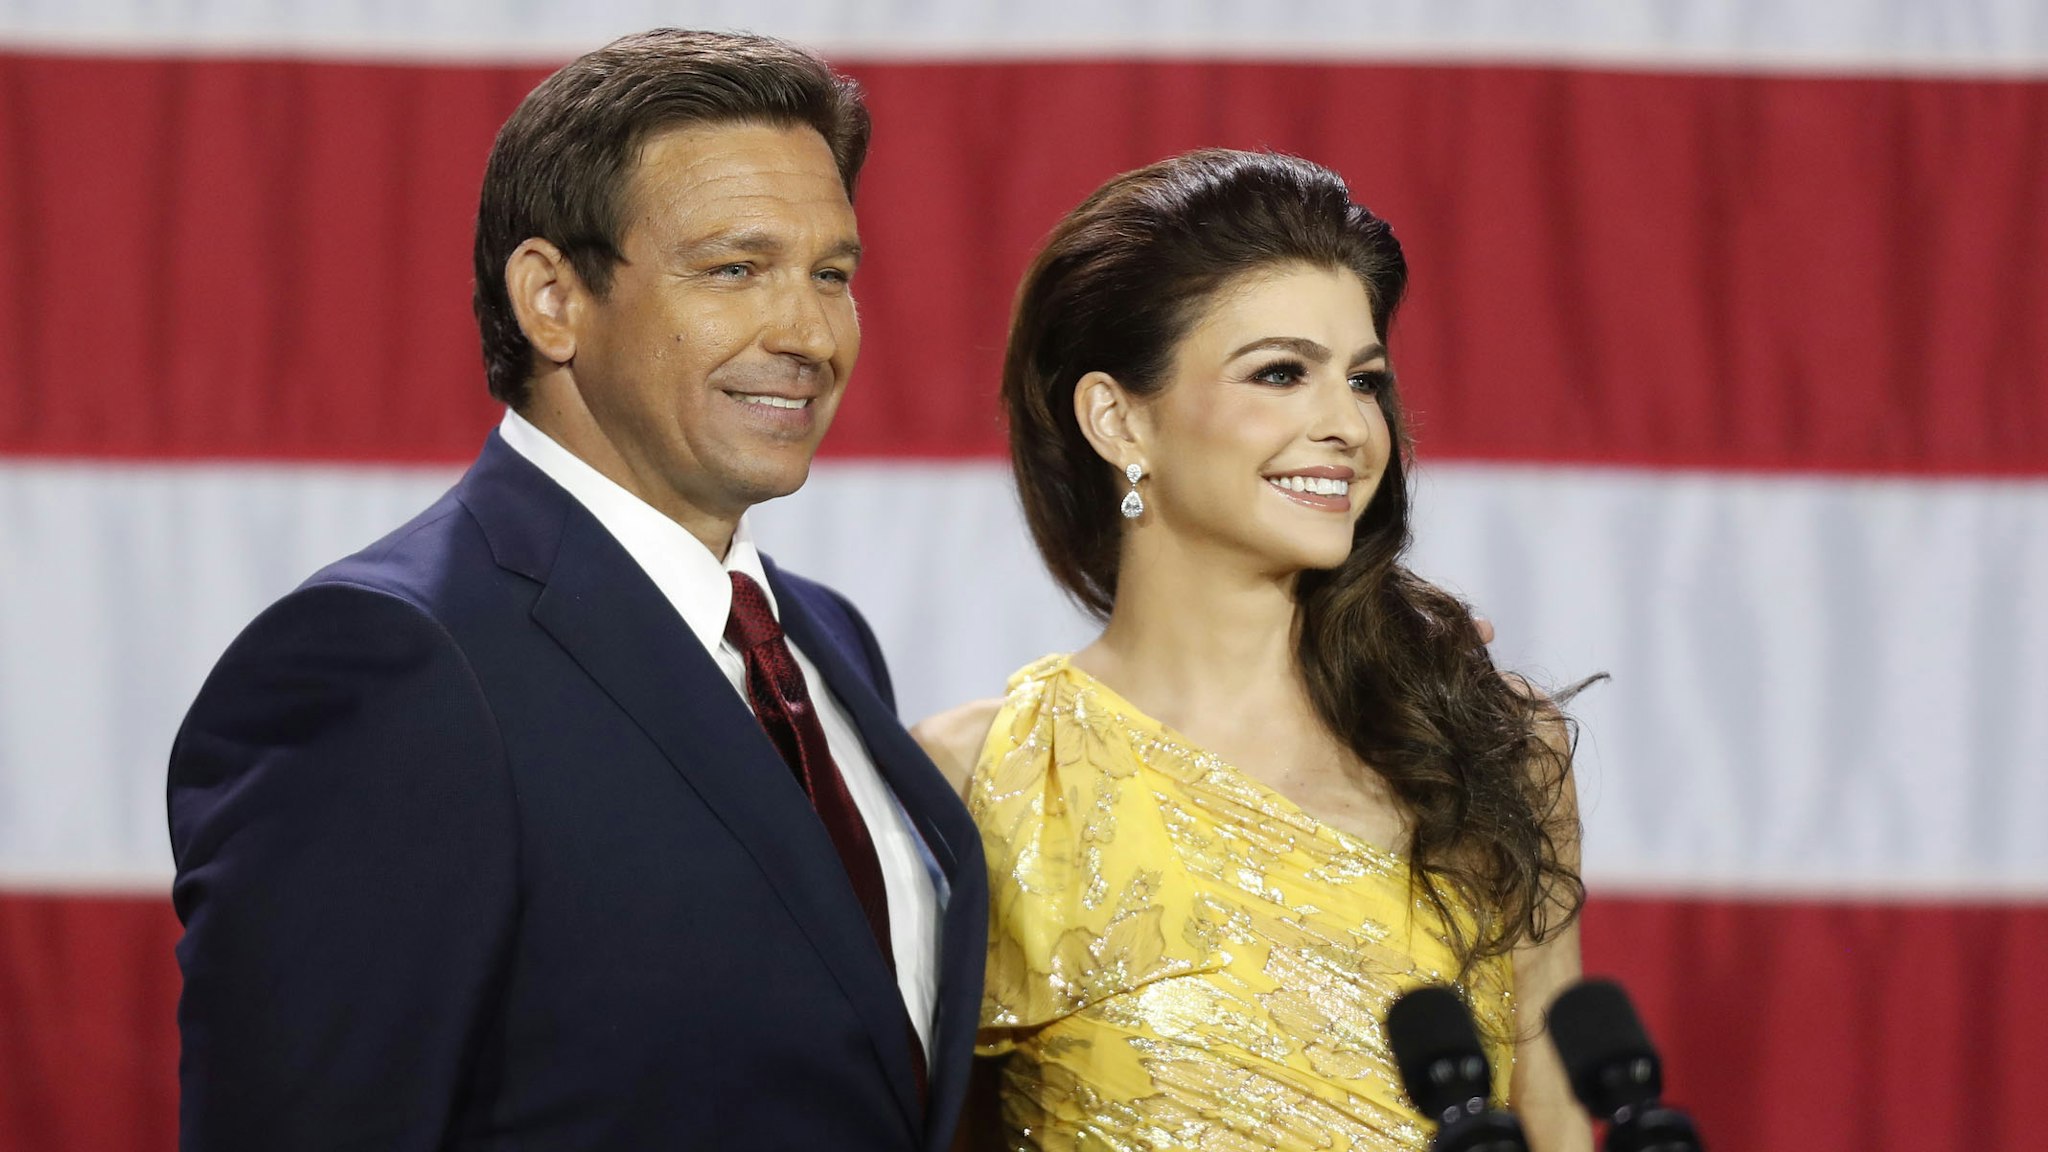 TAMPA, FL - NOVEMBER 08: Florida Gov. Ron DeSantis and his wife Casey DeSantis celebrate his victory over Democratic gubernatorial candidate Rep. Charlie Crist during an election night watch party at the Tampa Convention Center on November 8, 2022 in Tampa, Florida. DeSantis was the projected winner by a double-digit lead.